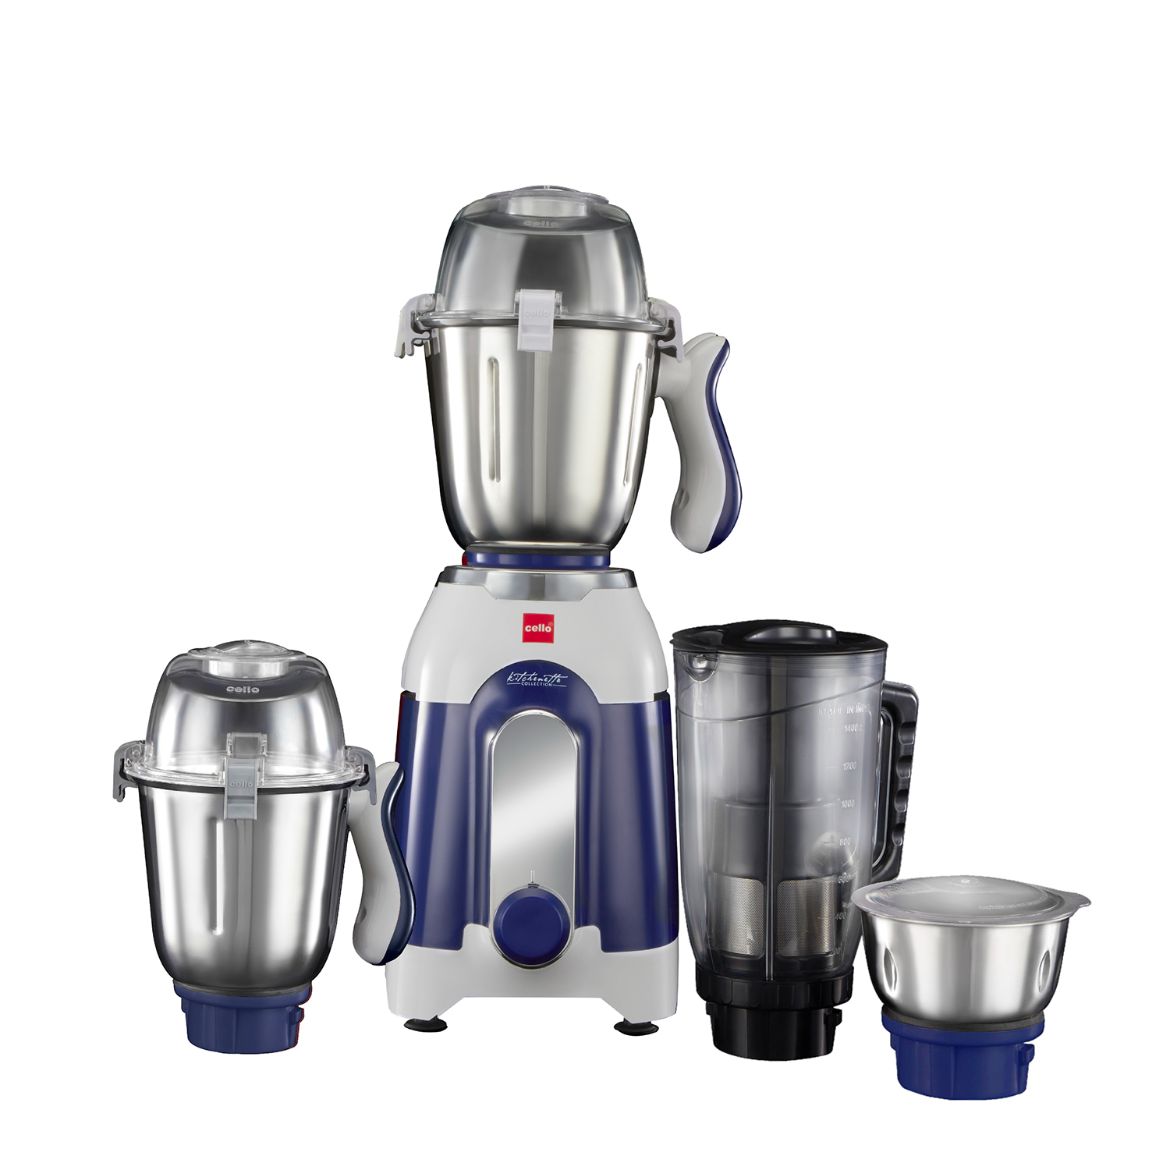 Discovery Pro Juicer Mixer Grinder with 4 Jars, 750W Blue / 750 Watts